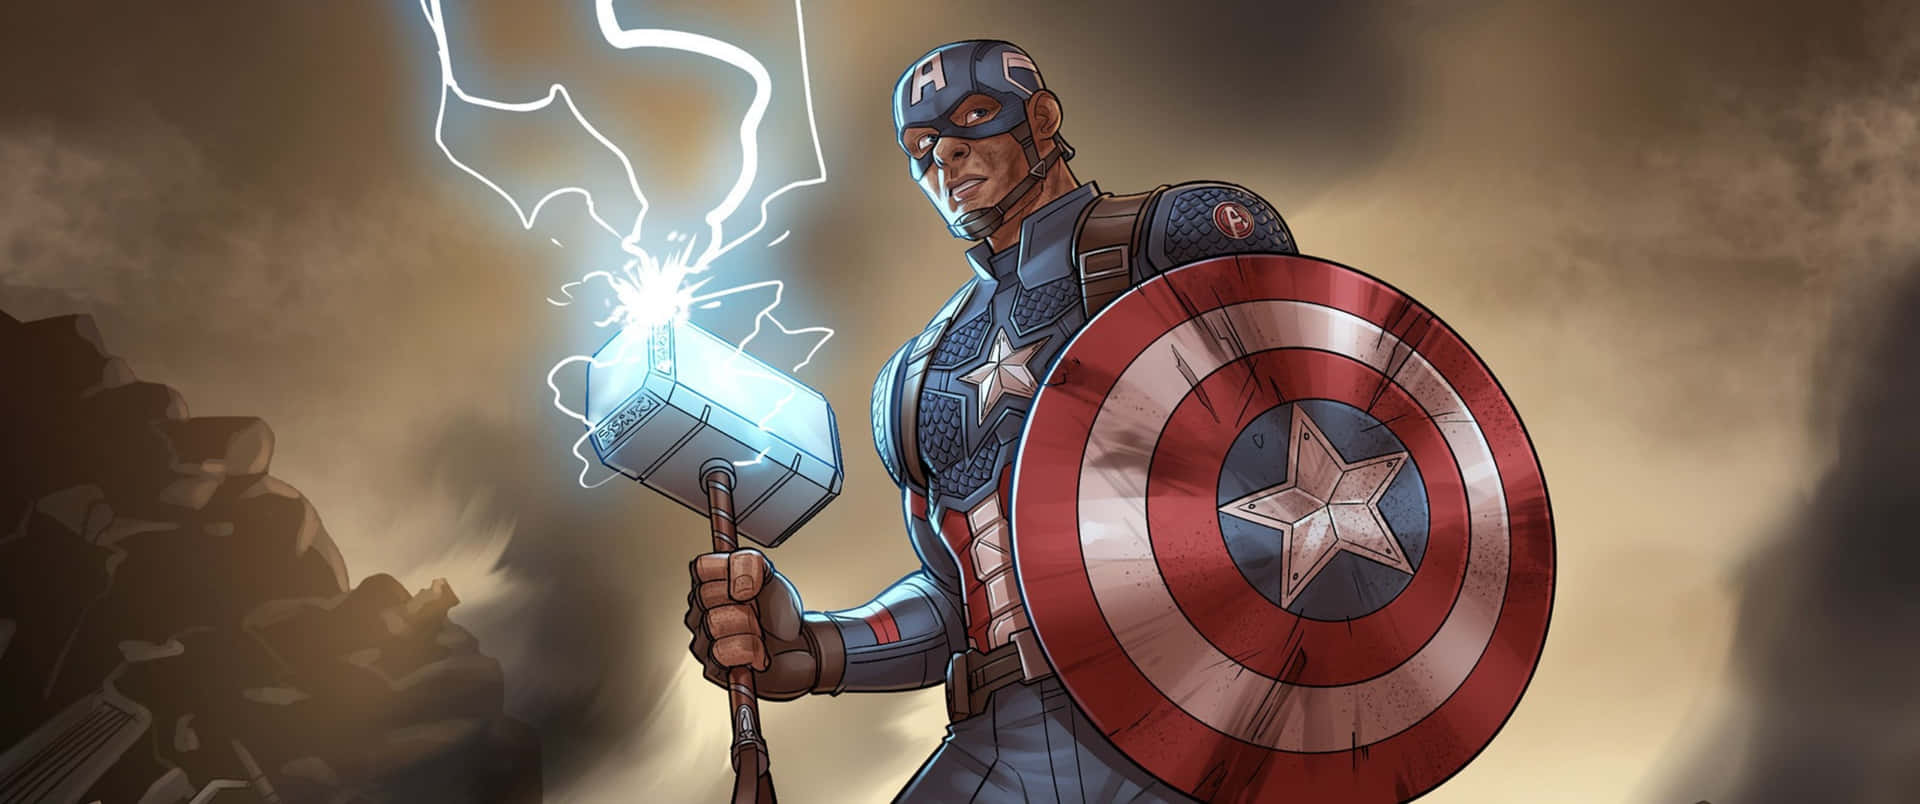 Captain America showing off his shield